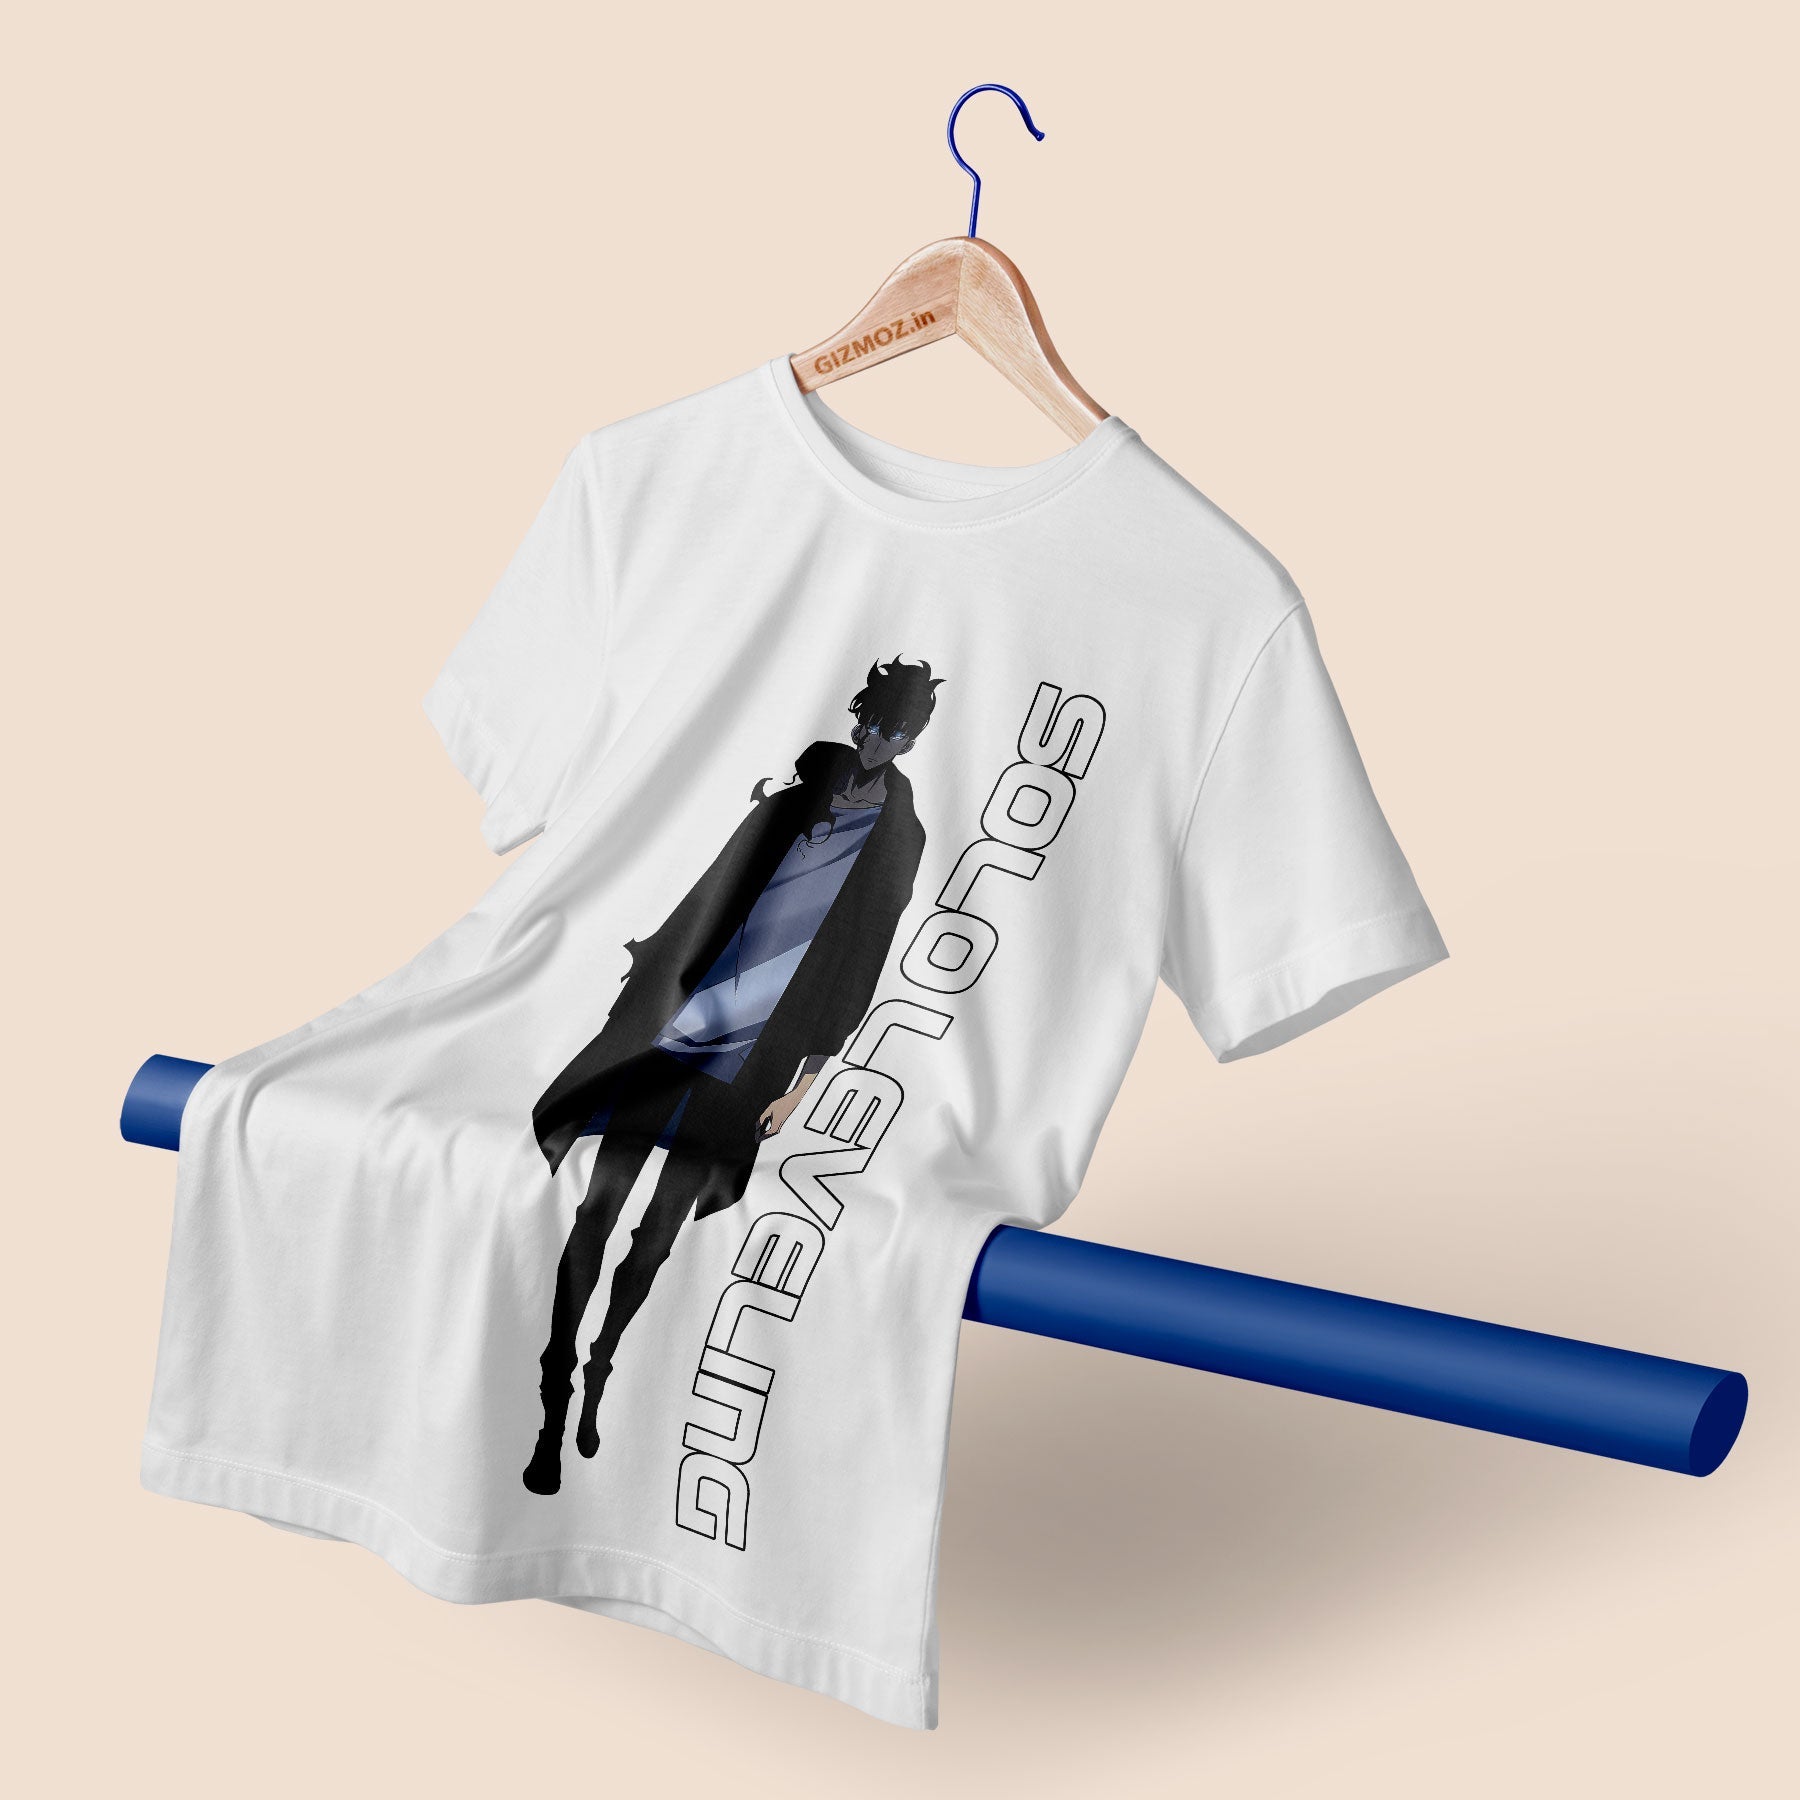 Solo Leveling Tshirt White - Gizmoz.in